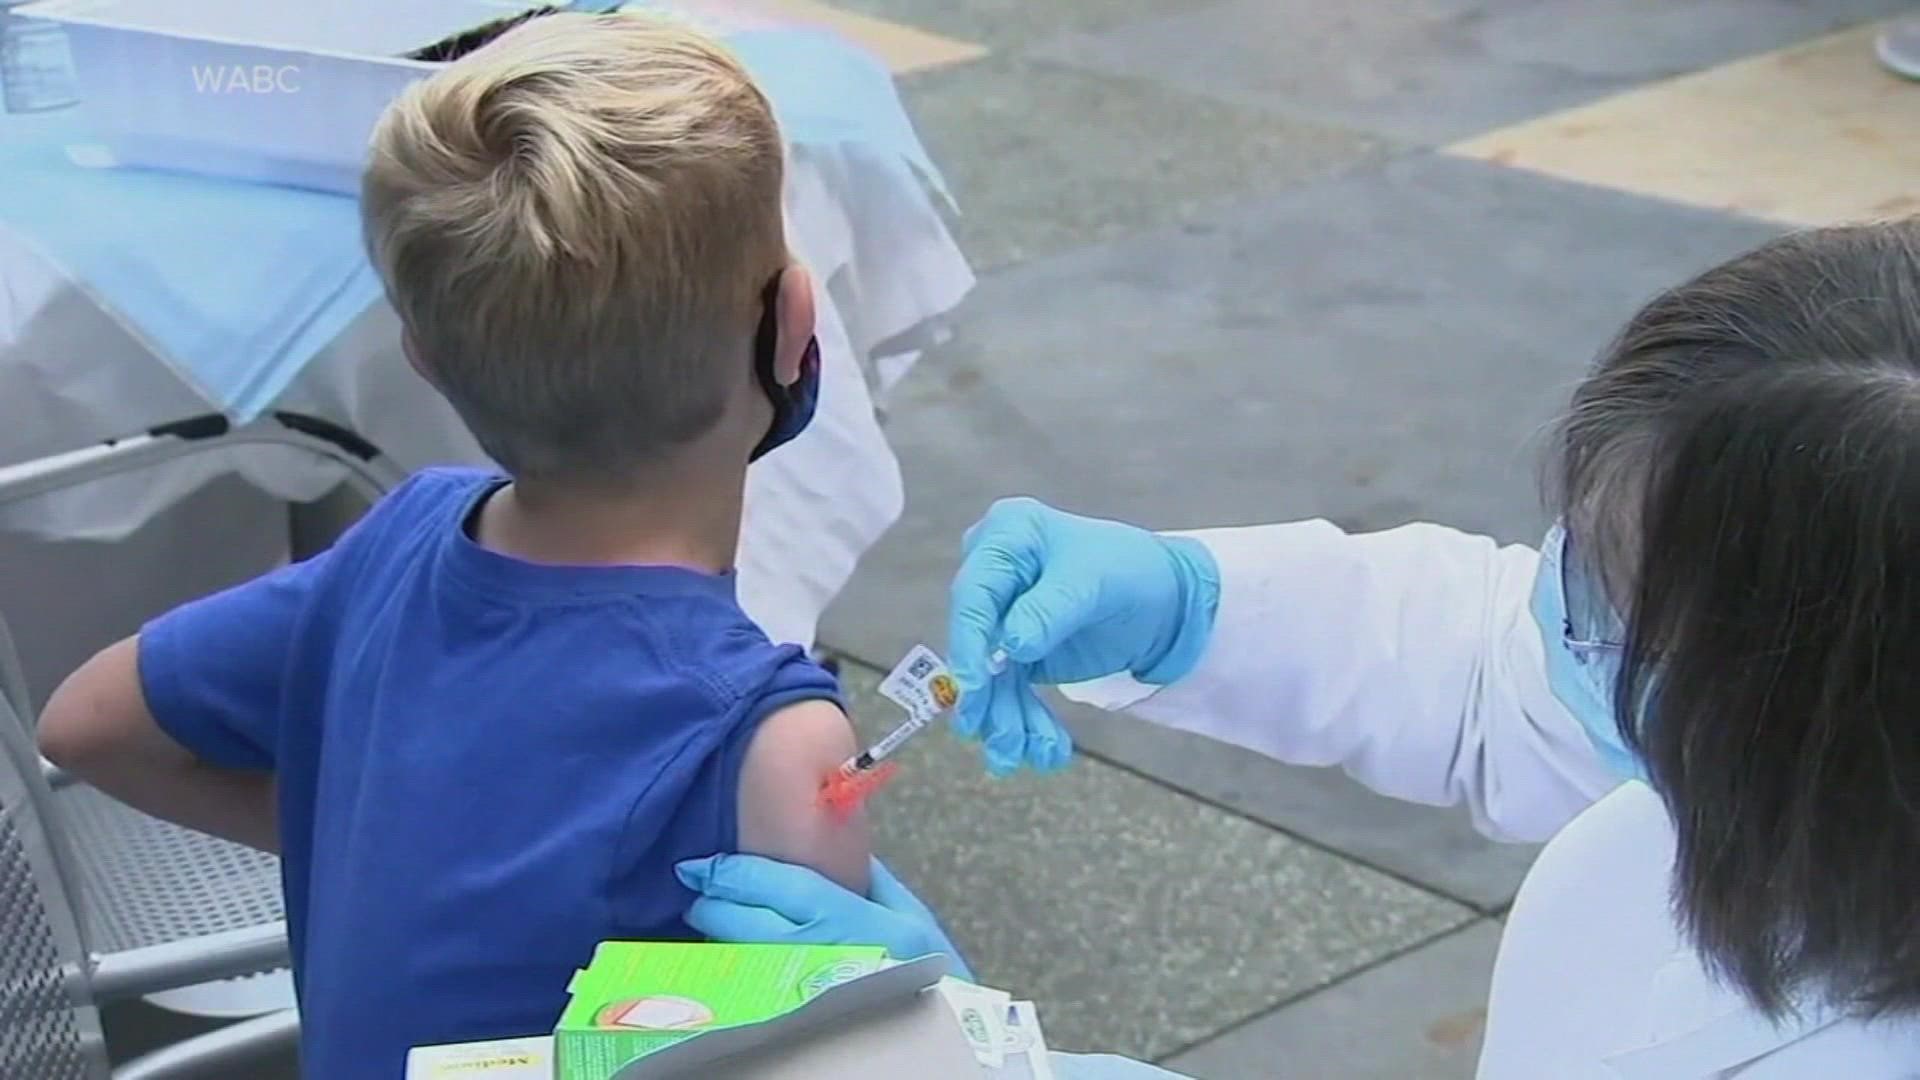 Shots will be made available to children as young as 6 months old by next week.